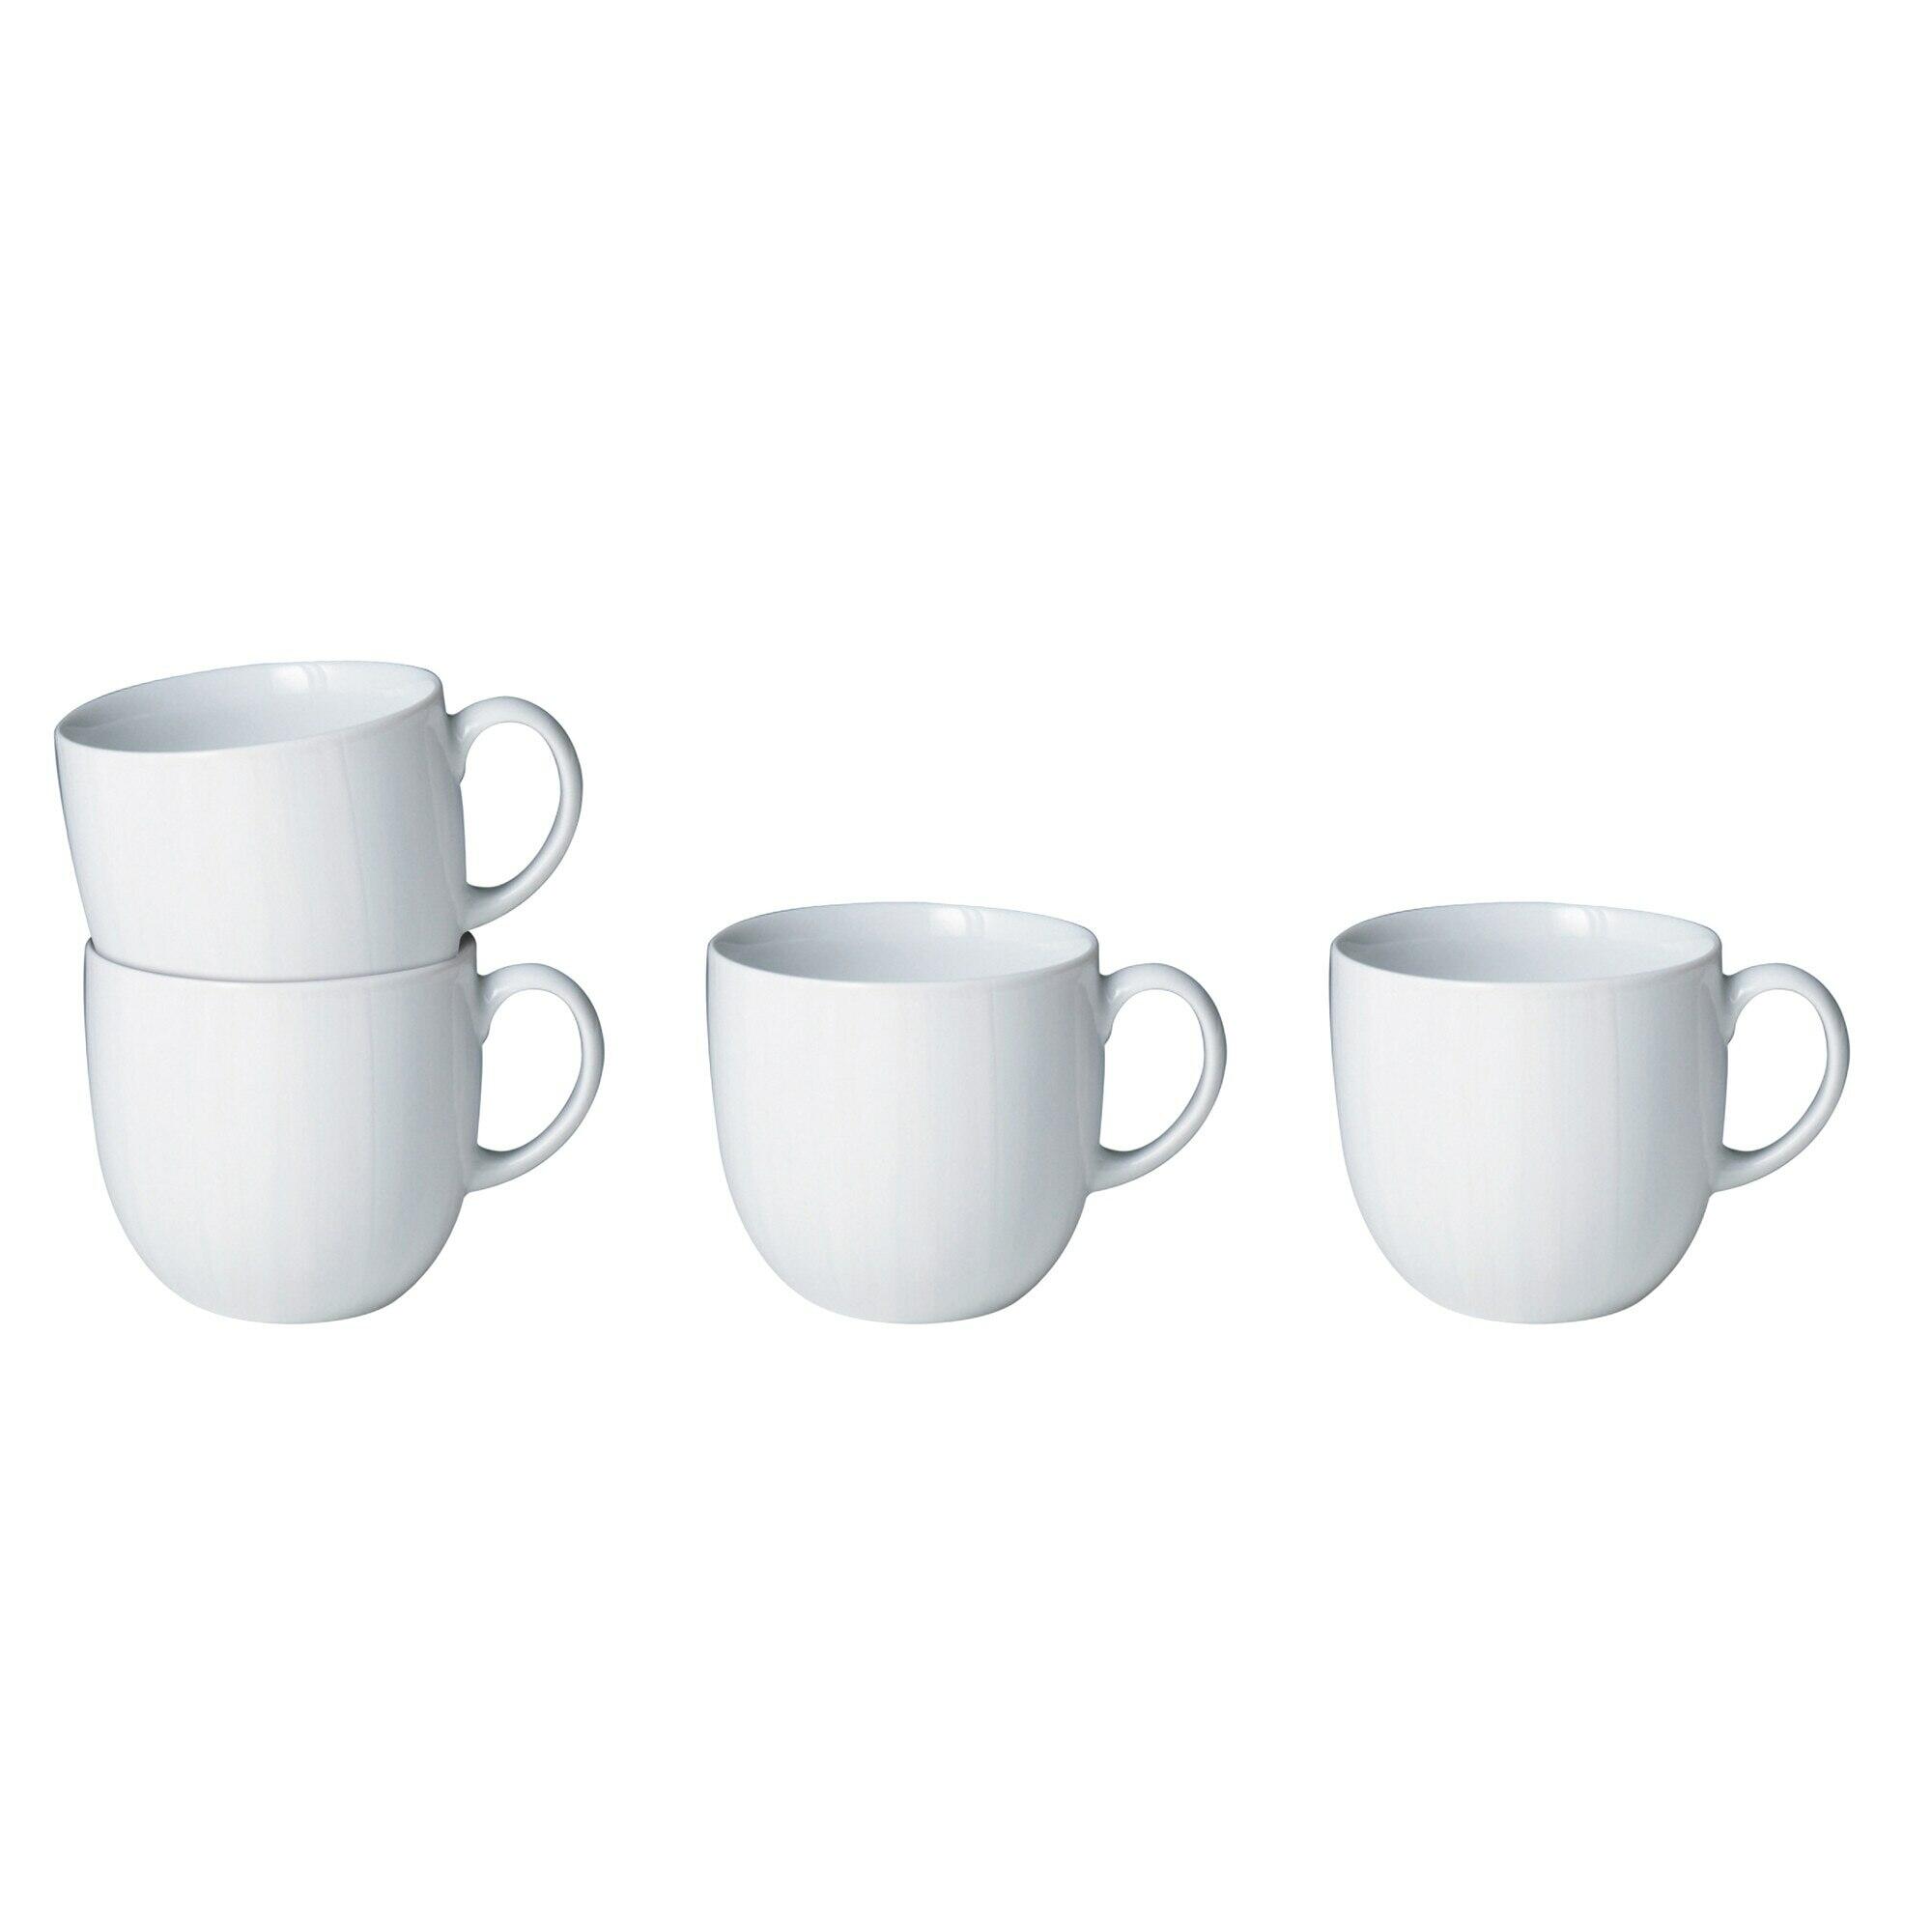 White by Denby Small Mugs Set of 4